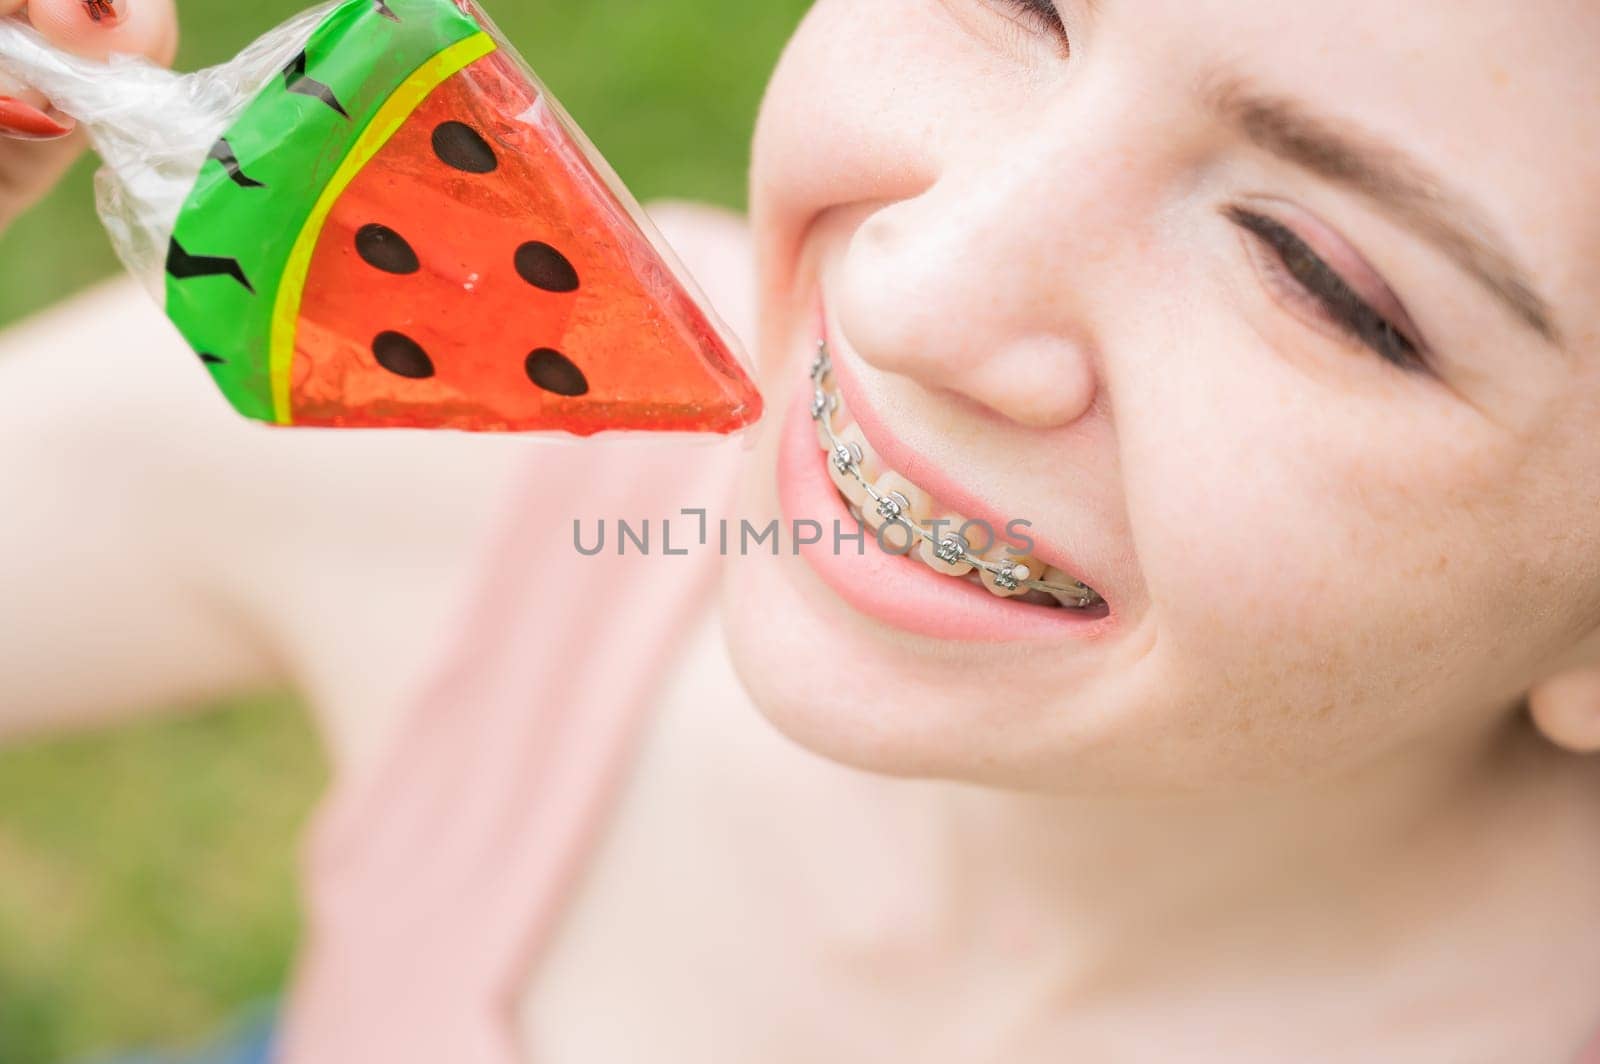 Beautiful young woman with braces on her teeth eats a watermelon-shaped lollipop outdoors. by mrwed54